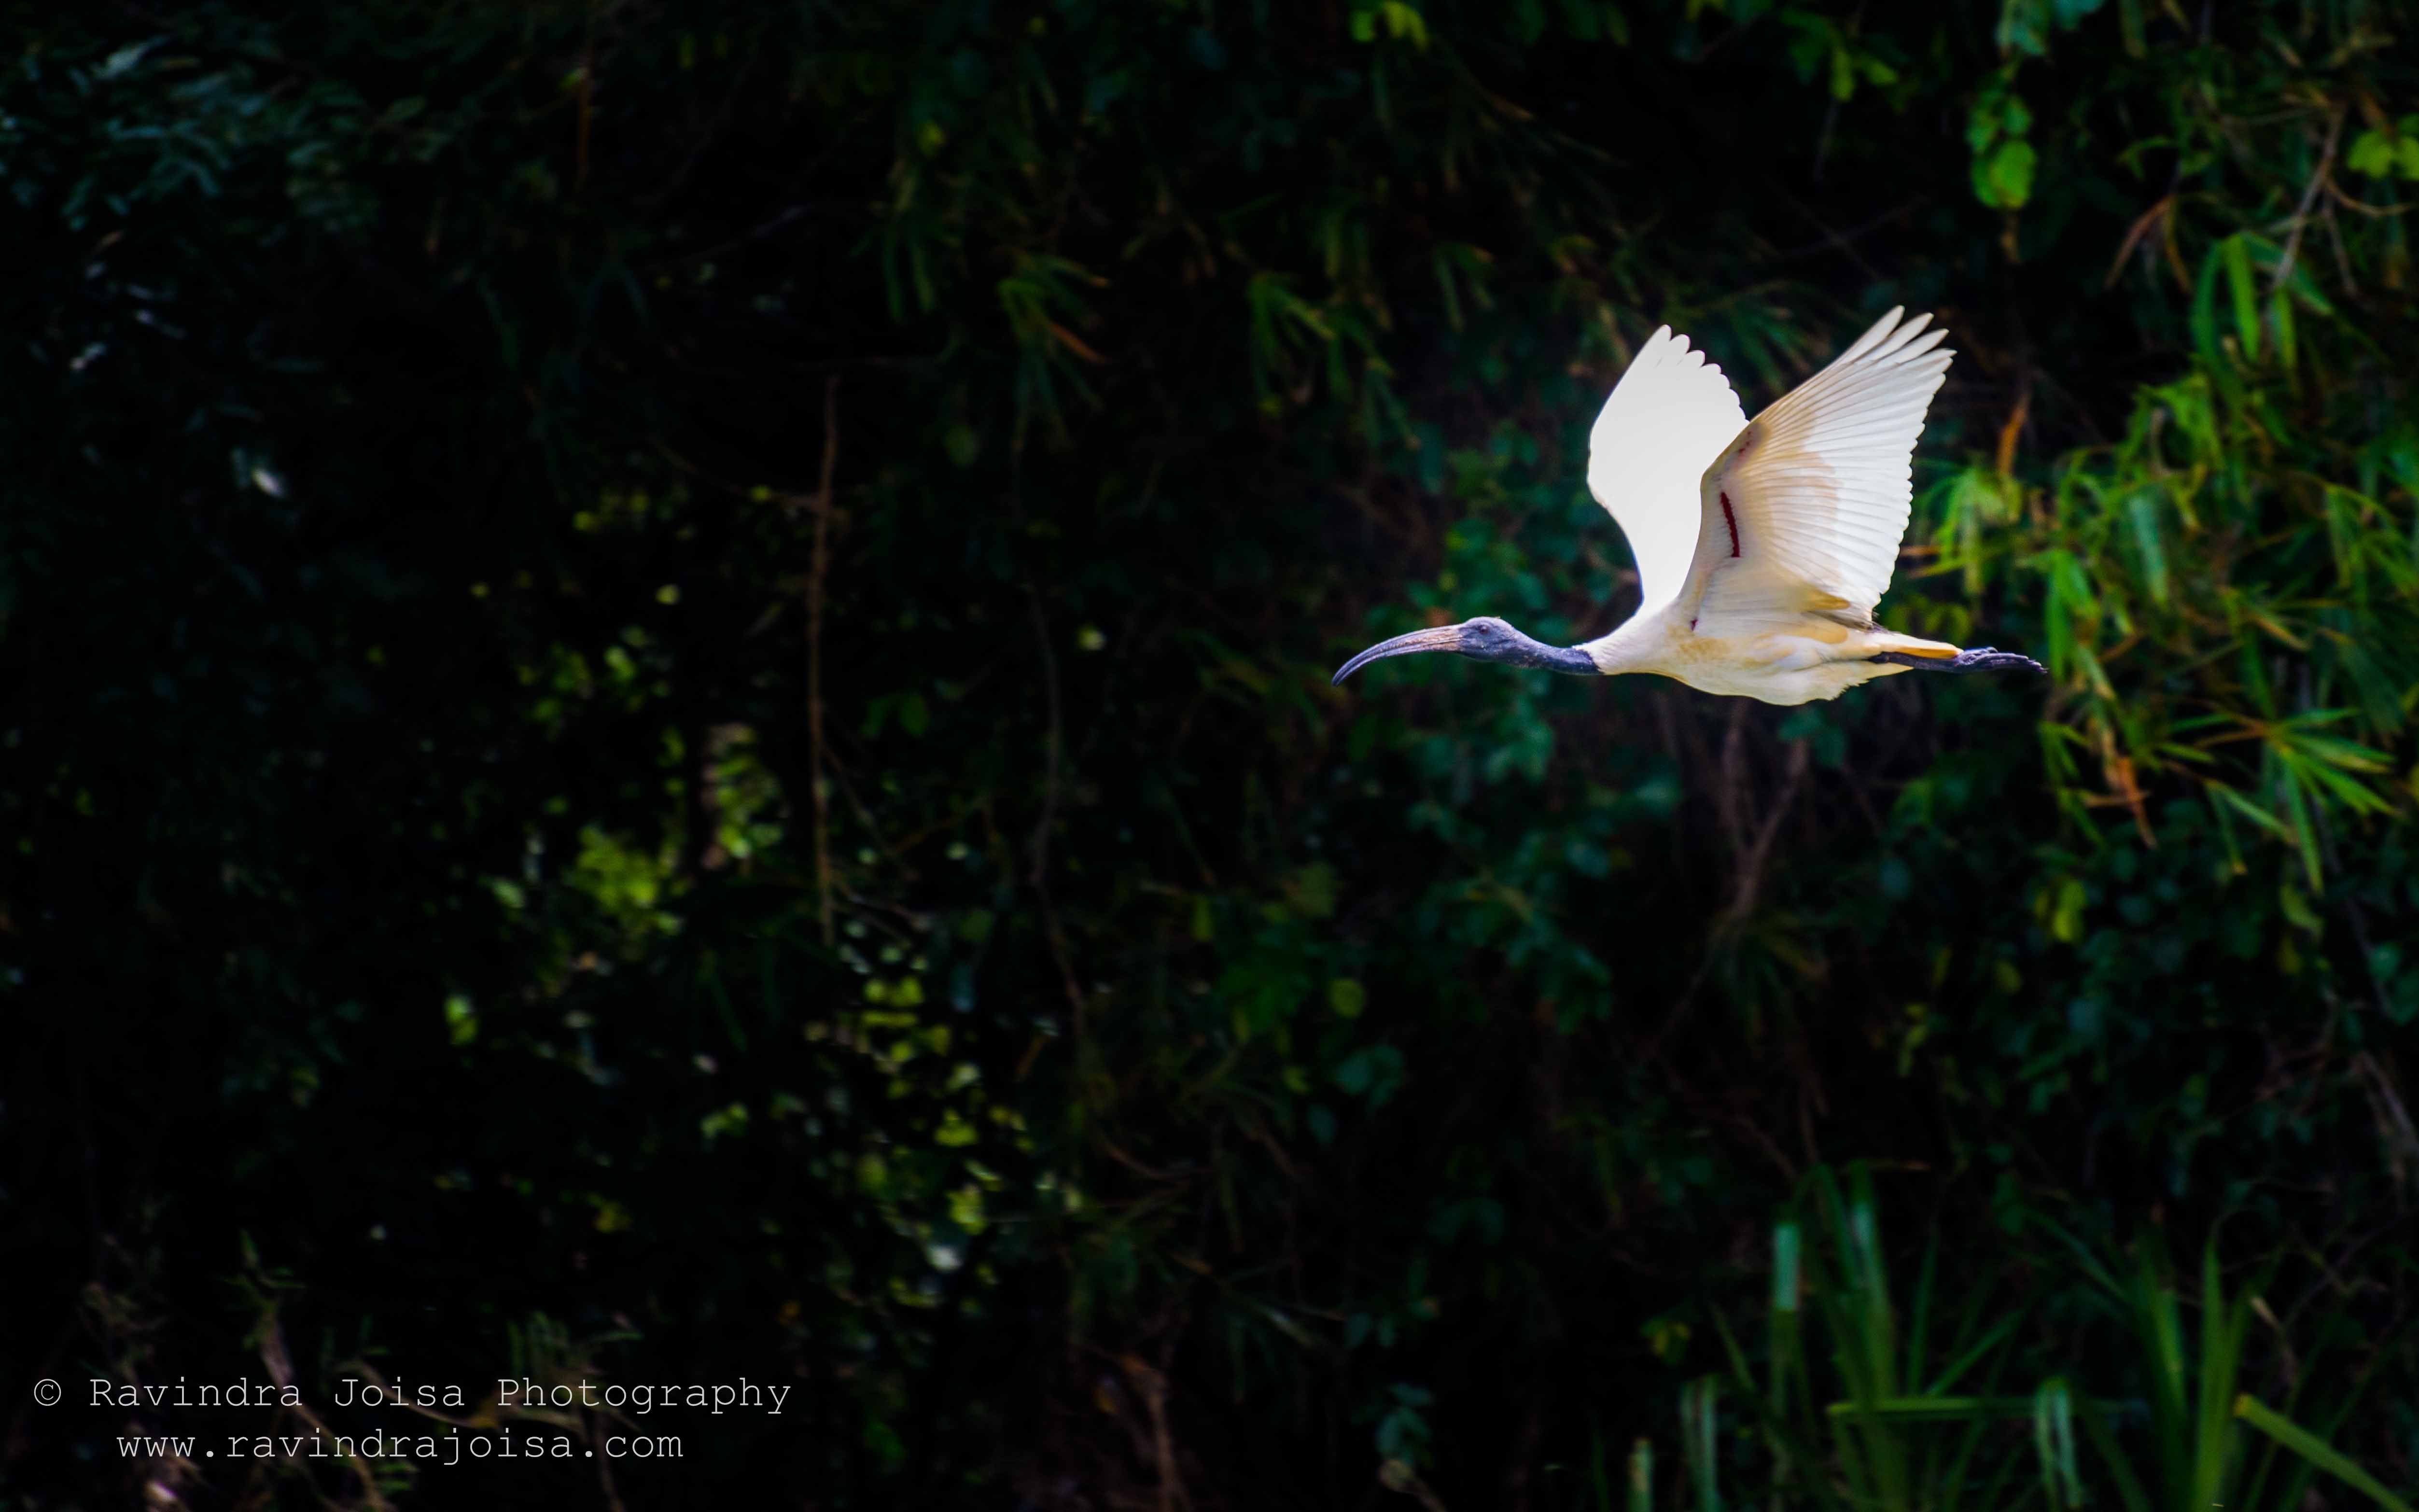 Black Headed Ibis - flying birds - photographing moving subjects